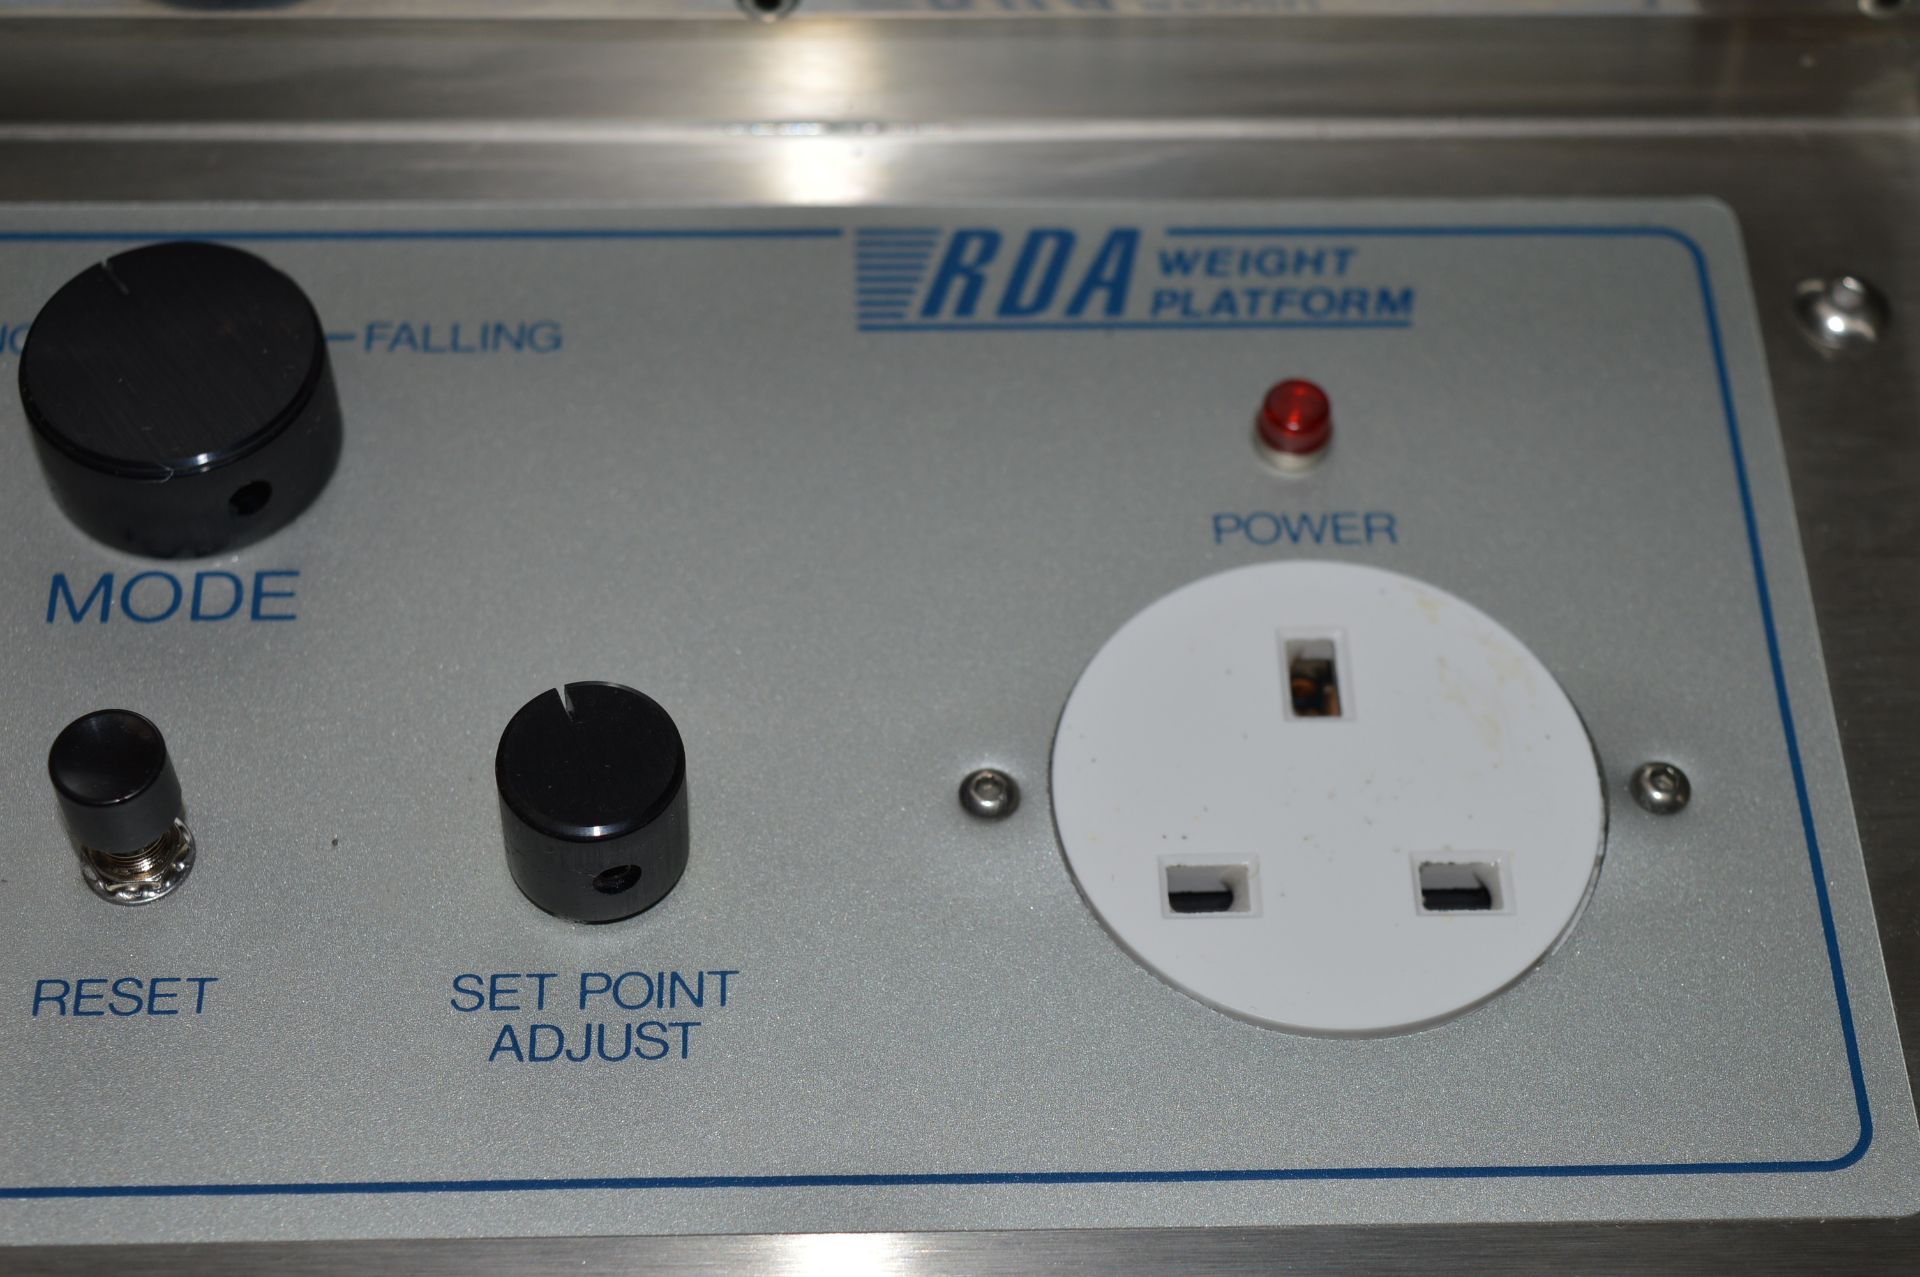 1 x RDA Professional Weight Platform Scale - CL011 - Designed For Refilling Refrigerant Cylinders, - Image 3 of 12